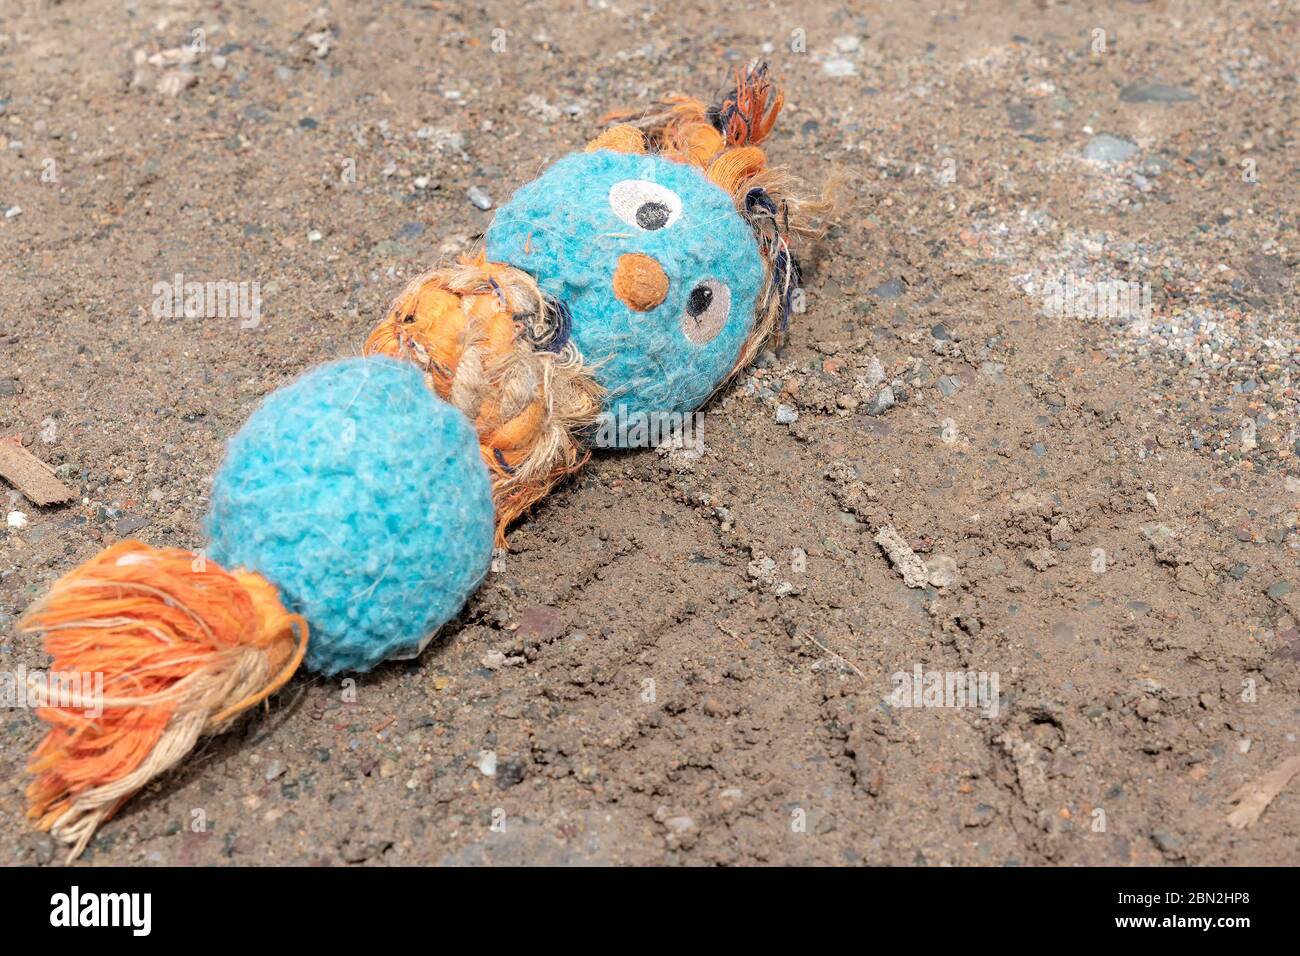 A dirty faded stuffed child's toy lying in dirt. Faint tire tracks from an automobile below the toy. Stock Photo